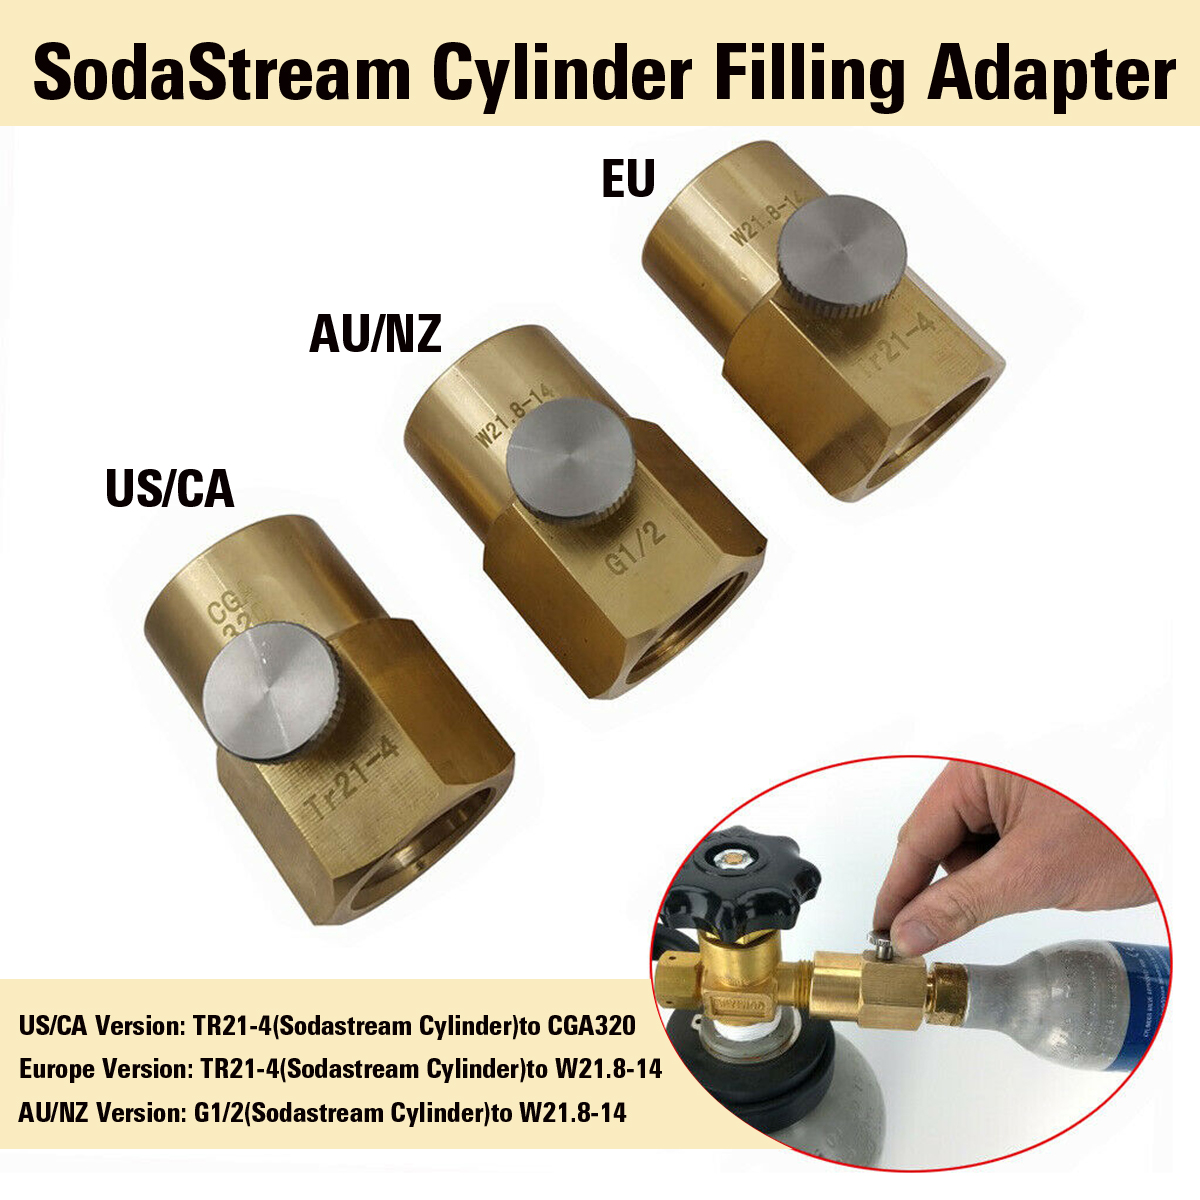 SodaStream-Cylinder-Refill-Adapter--Bleed-Valve--W218-14-US-CGA320-Connector-1545608-1